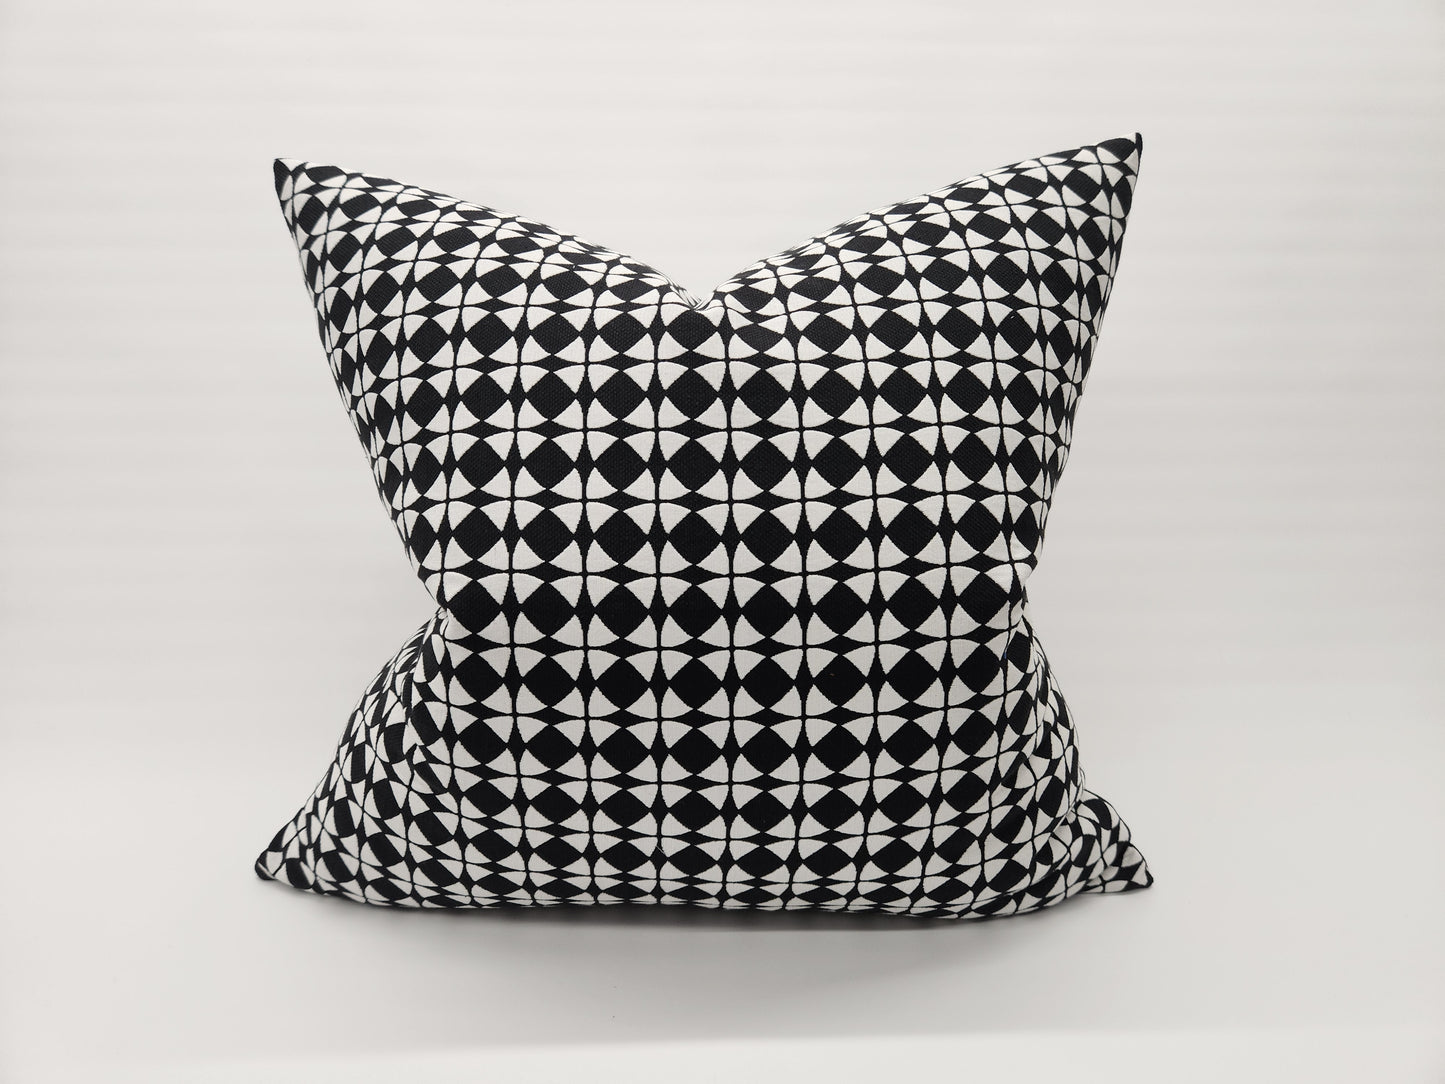 Explorer58 Square Pillow Cover, Deep Space Black, Various Sizes, with or without Inserts, Handmade by Houston and Scott